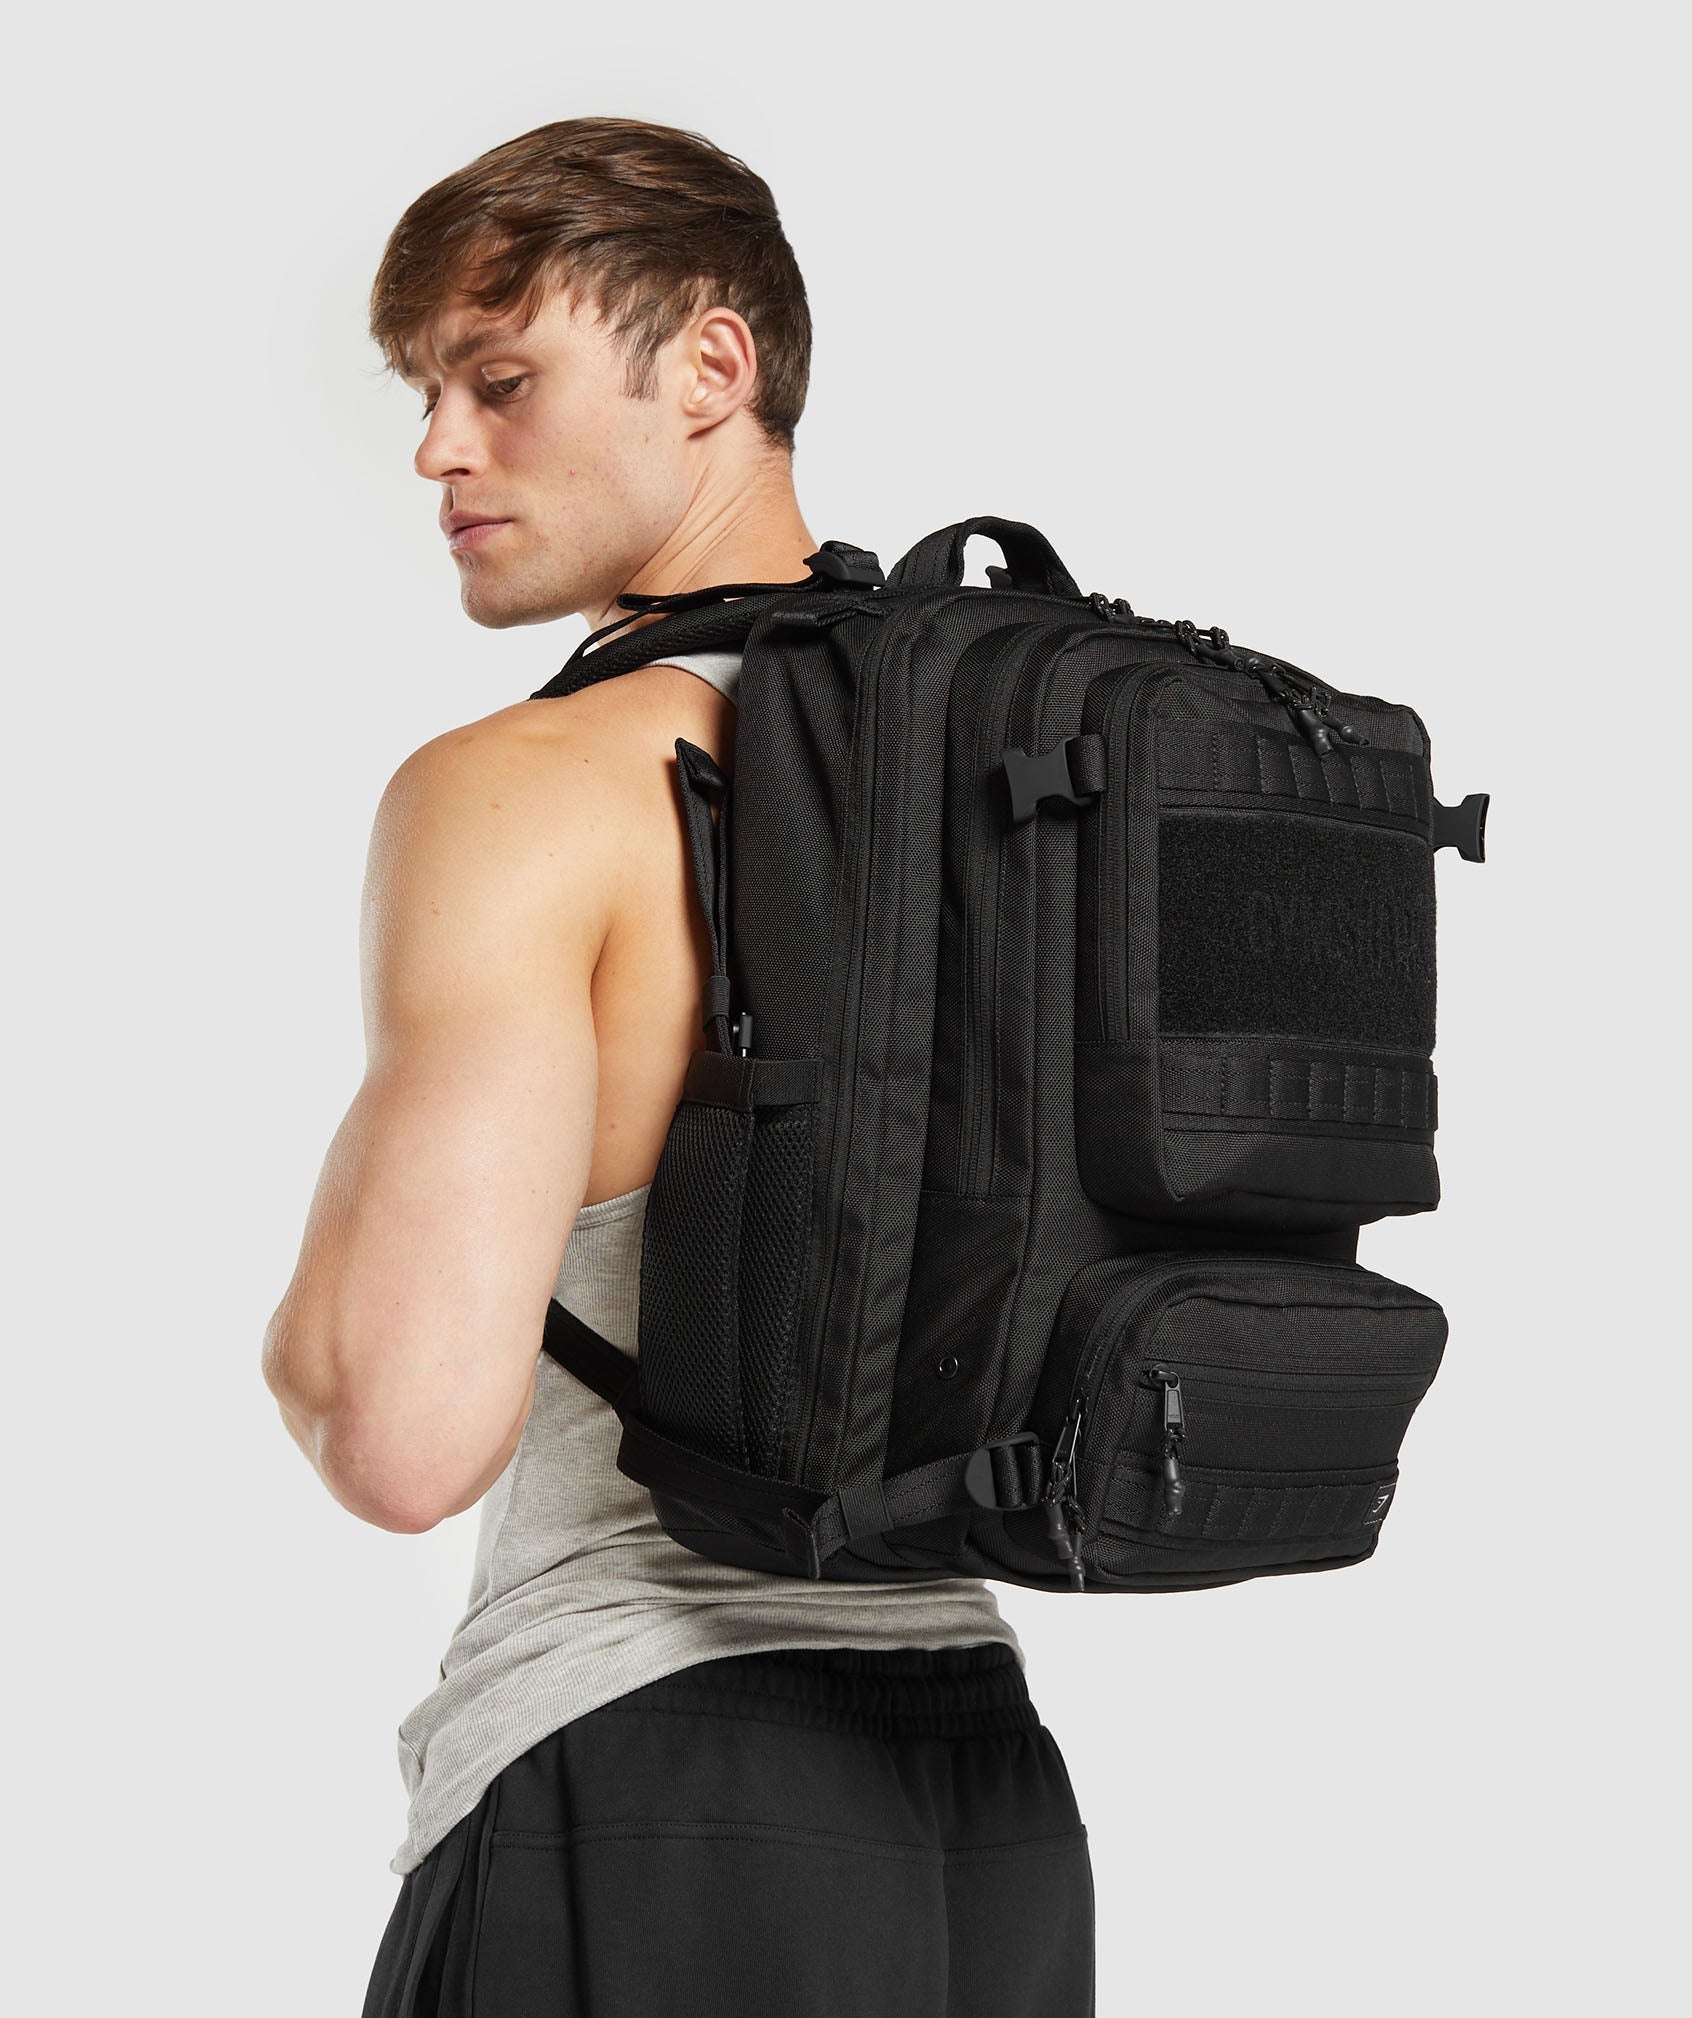 Tactical Backpack in Black - view 3